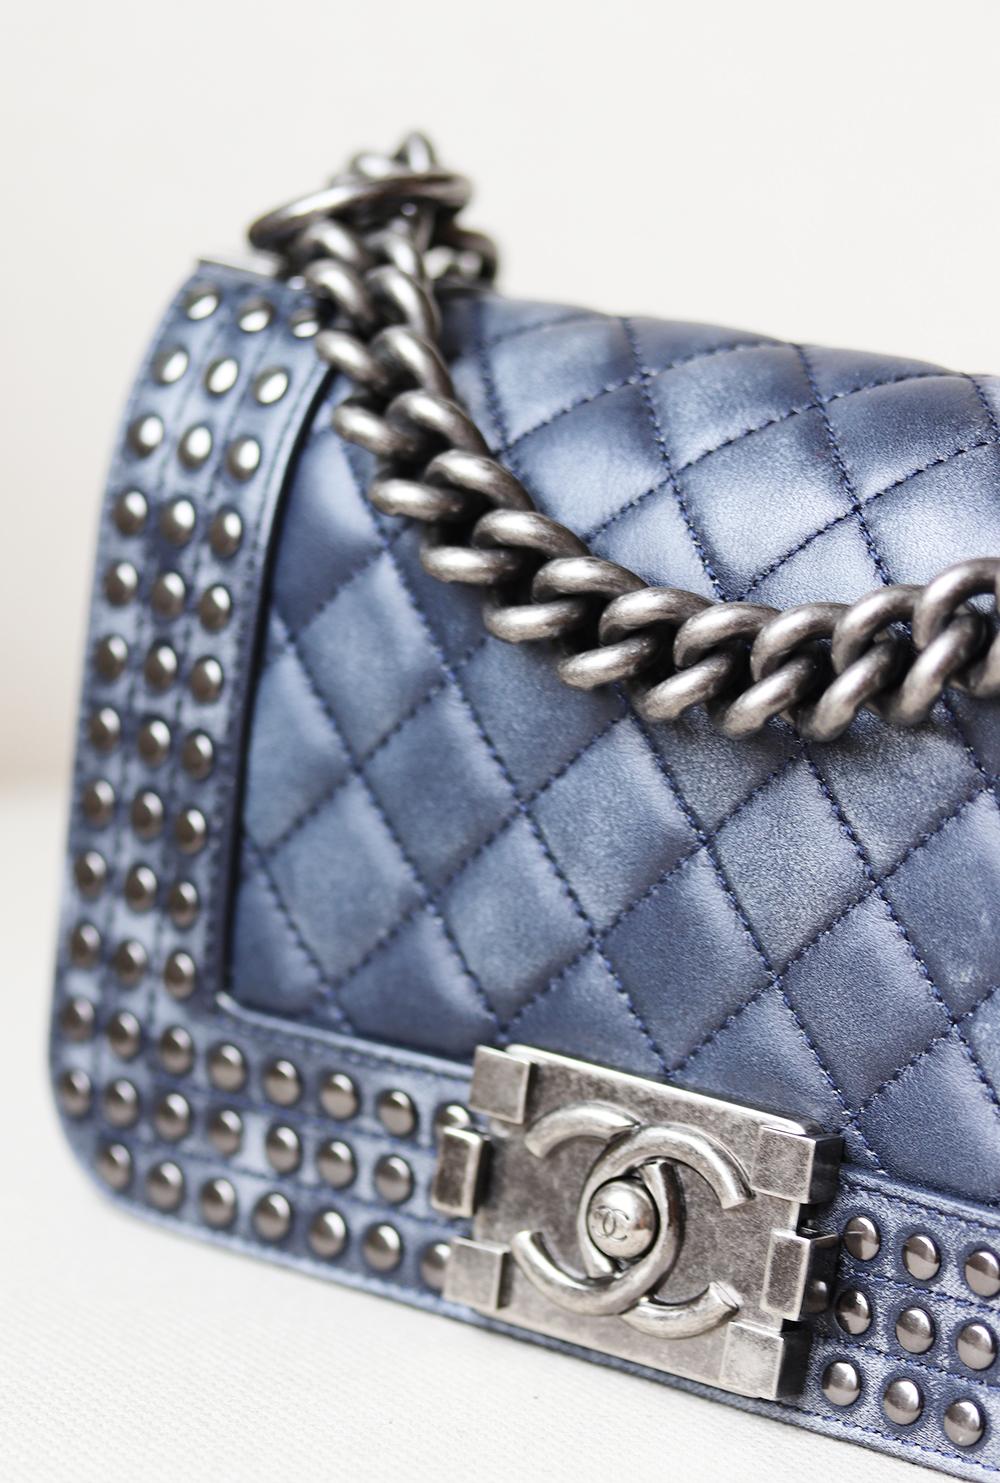 Chanel Small Boy Faded Leather Studded Flap Bag from Chanel Paris-Dallas 2014 collection has been hand-finished by skilled artisans in the label's workshop.
Boasting soft faded blue quilted lambskin-leather exterior and studded detail along the